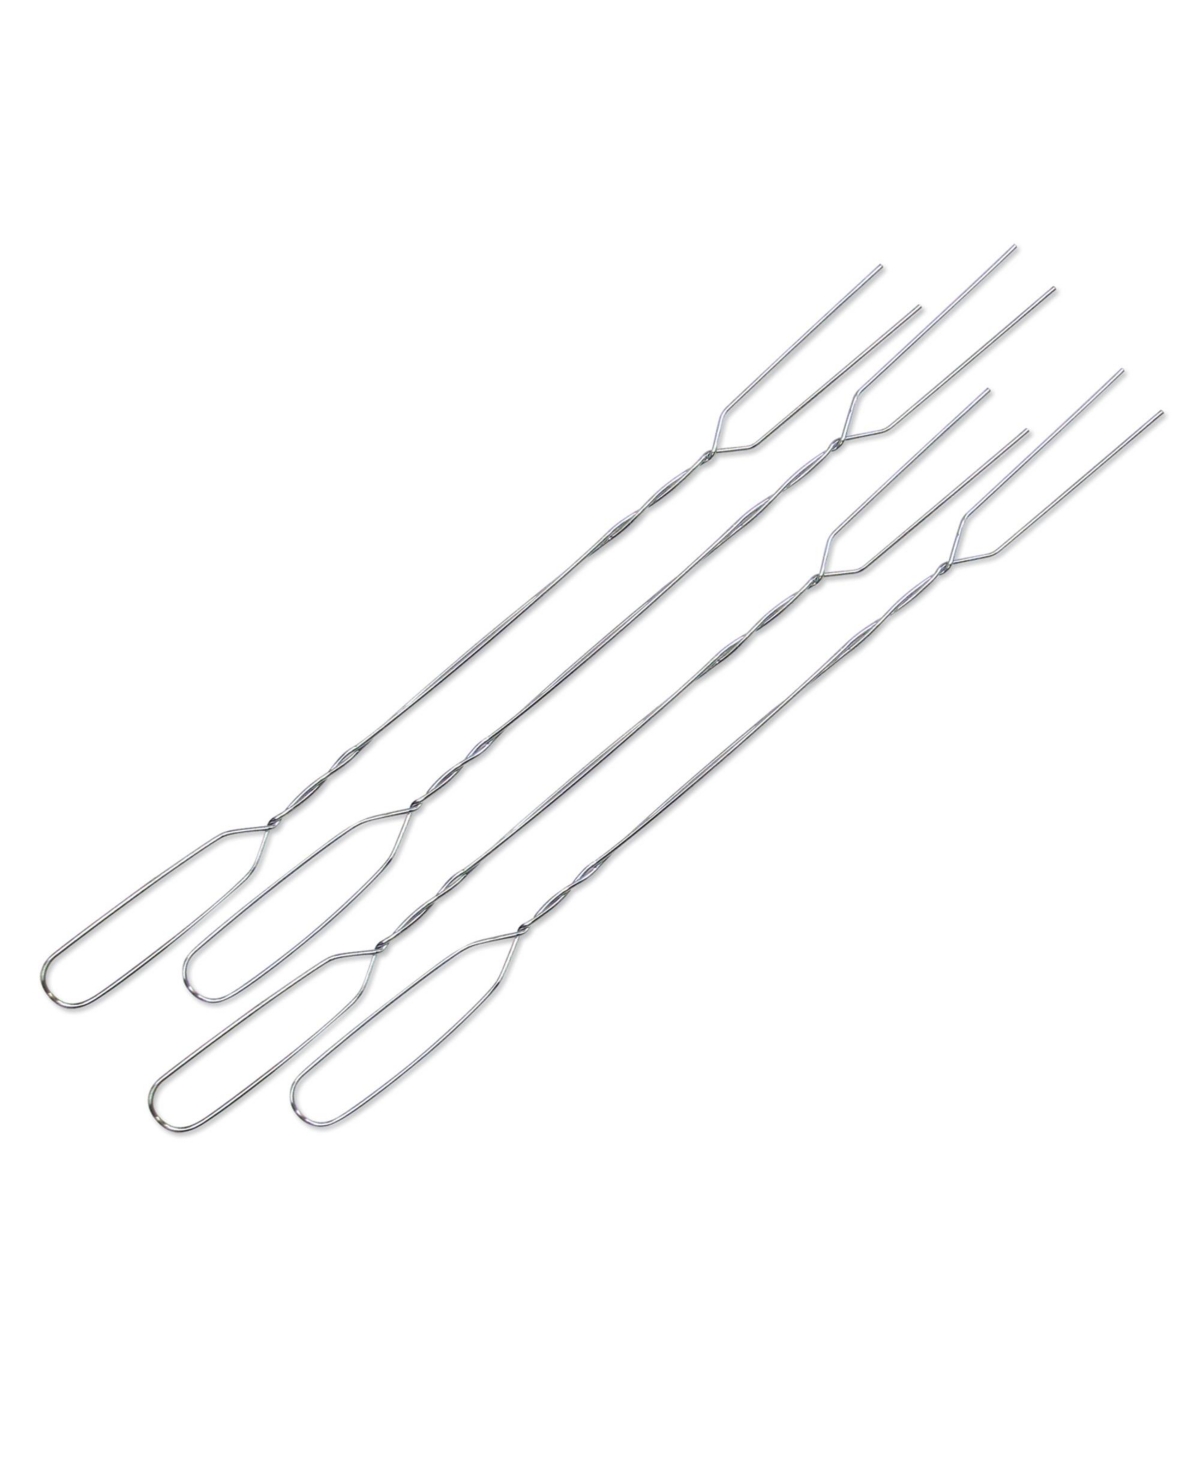 20-Inch Grill Forks - 4 Pack - Silver